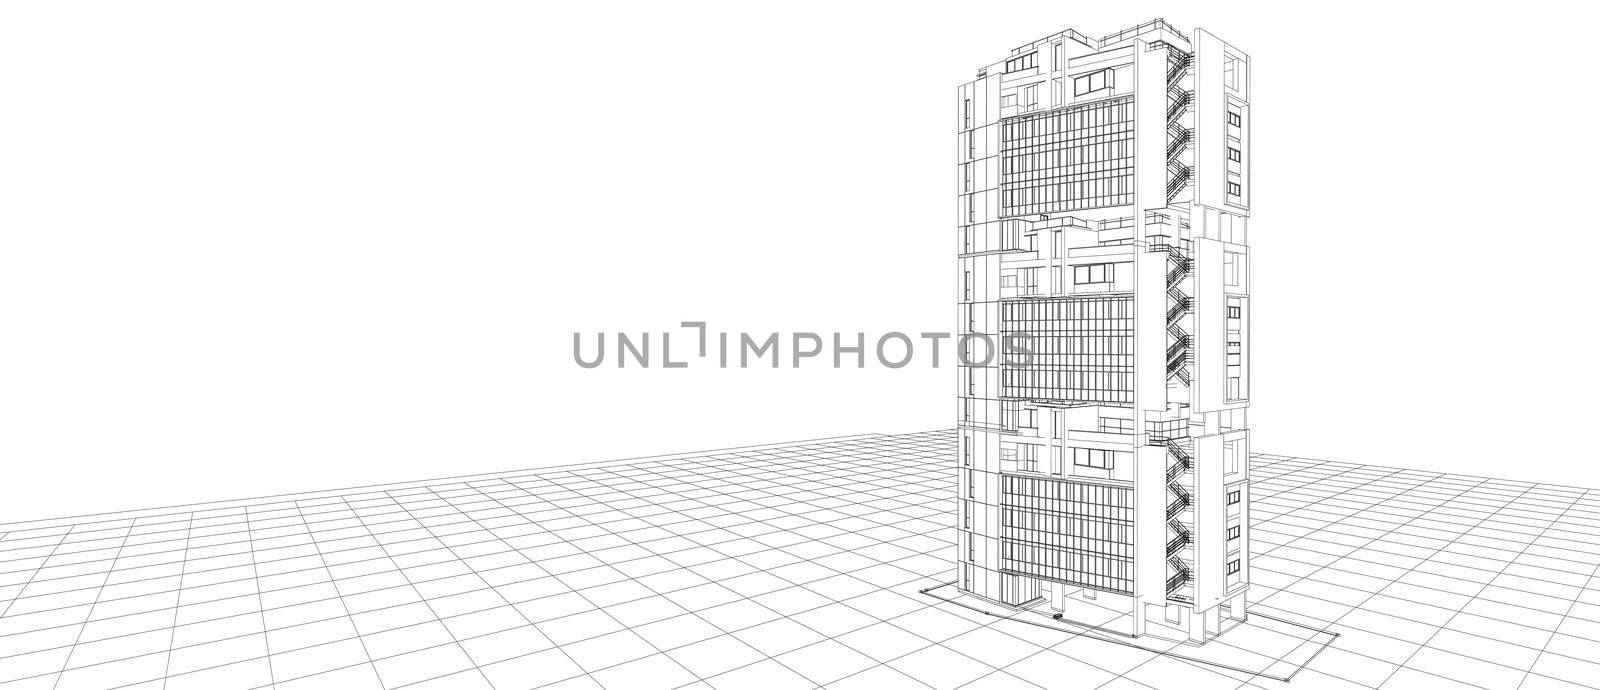 Architecture exterior facade design concept 3d building perspective wire frame rendering isolated white background. For abstract background or wallpaper desktops computer technology design architectural theme.